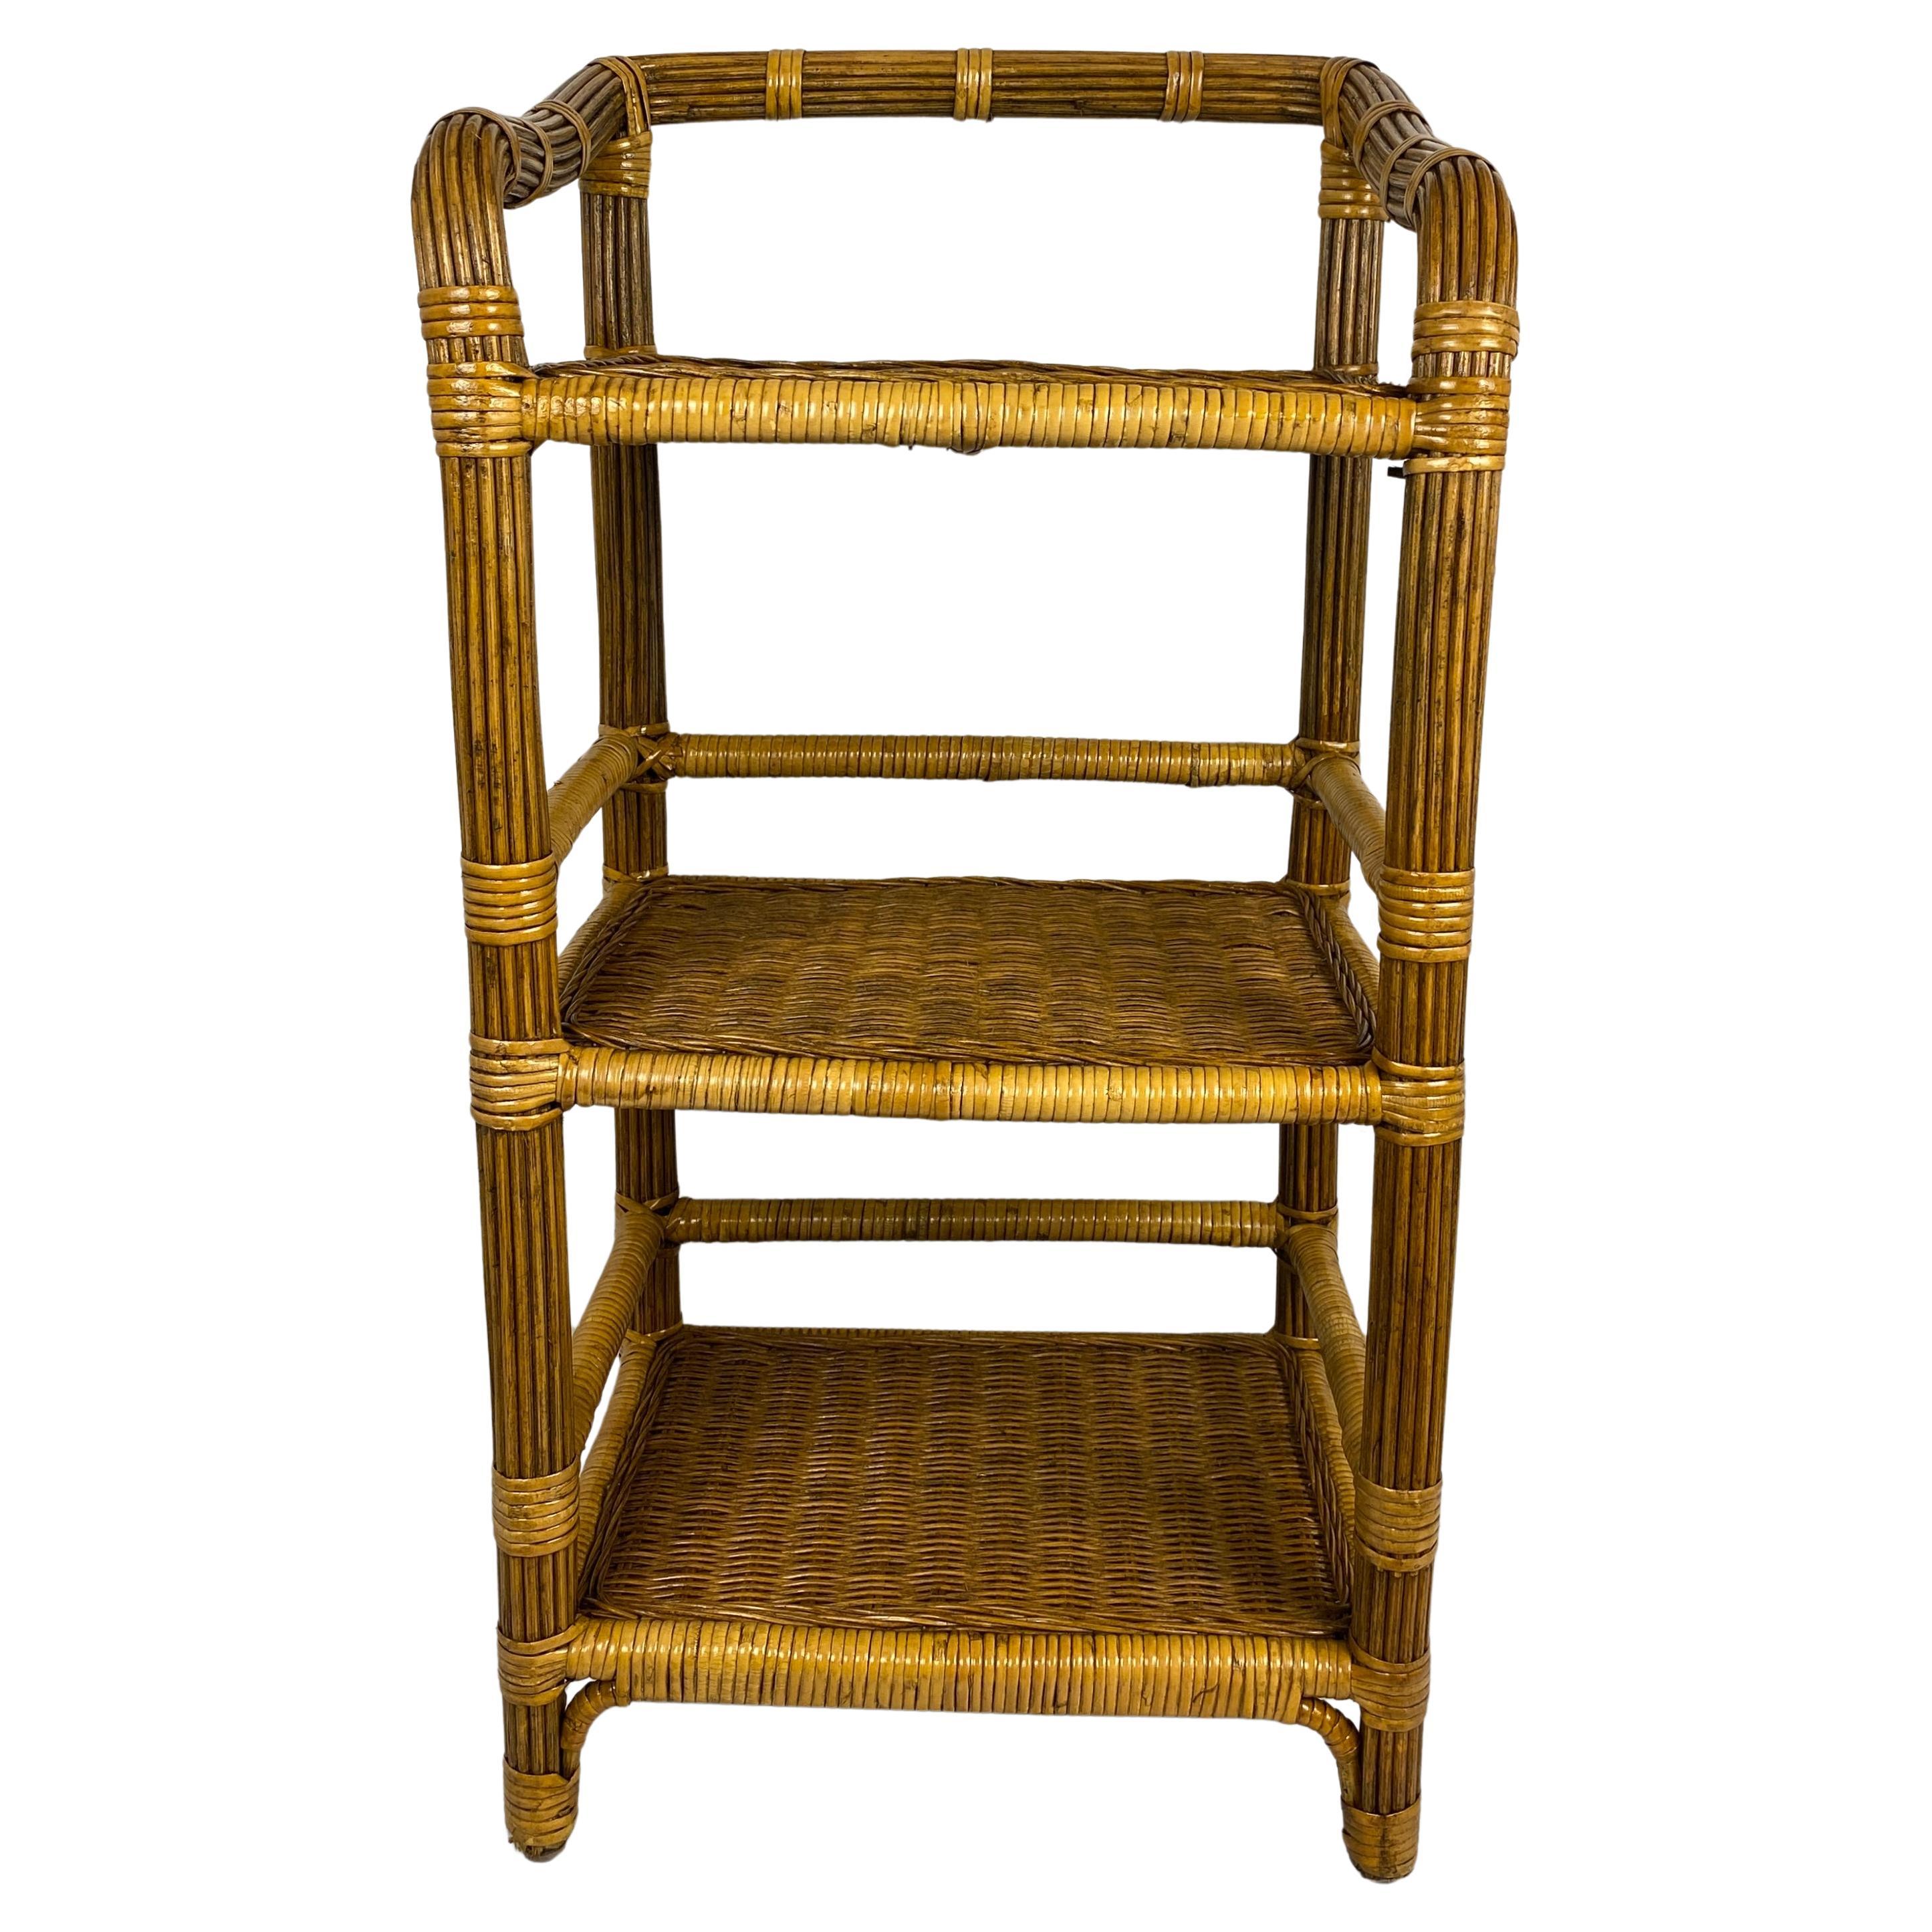 Vintage Rattan Side Table with 3 Shelves For Sale